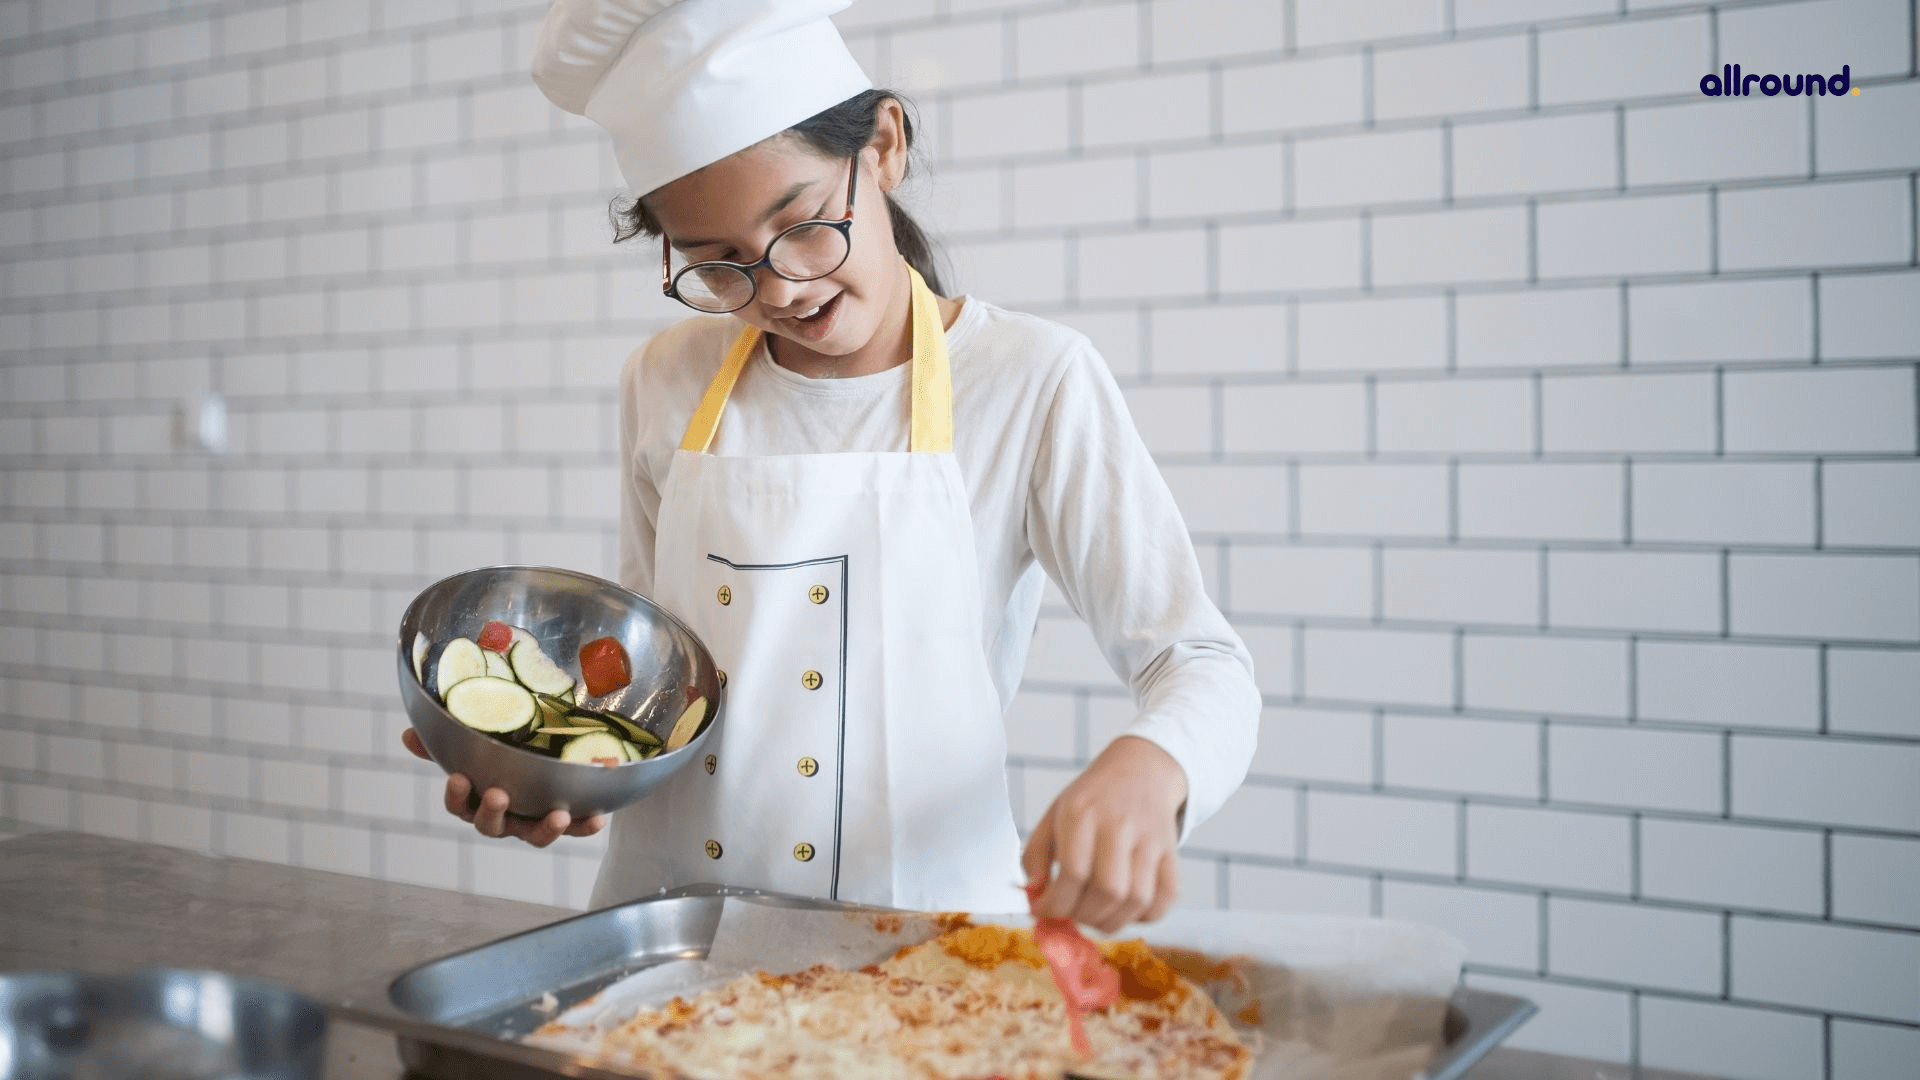 10 Home Ec Skills Your Kids Need to Know